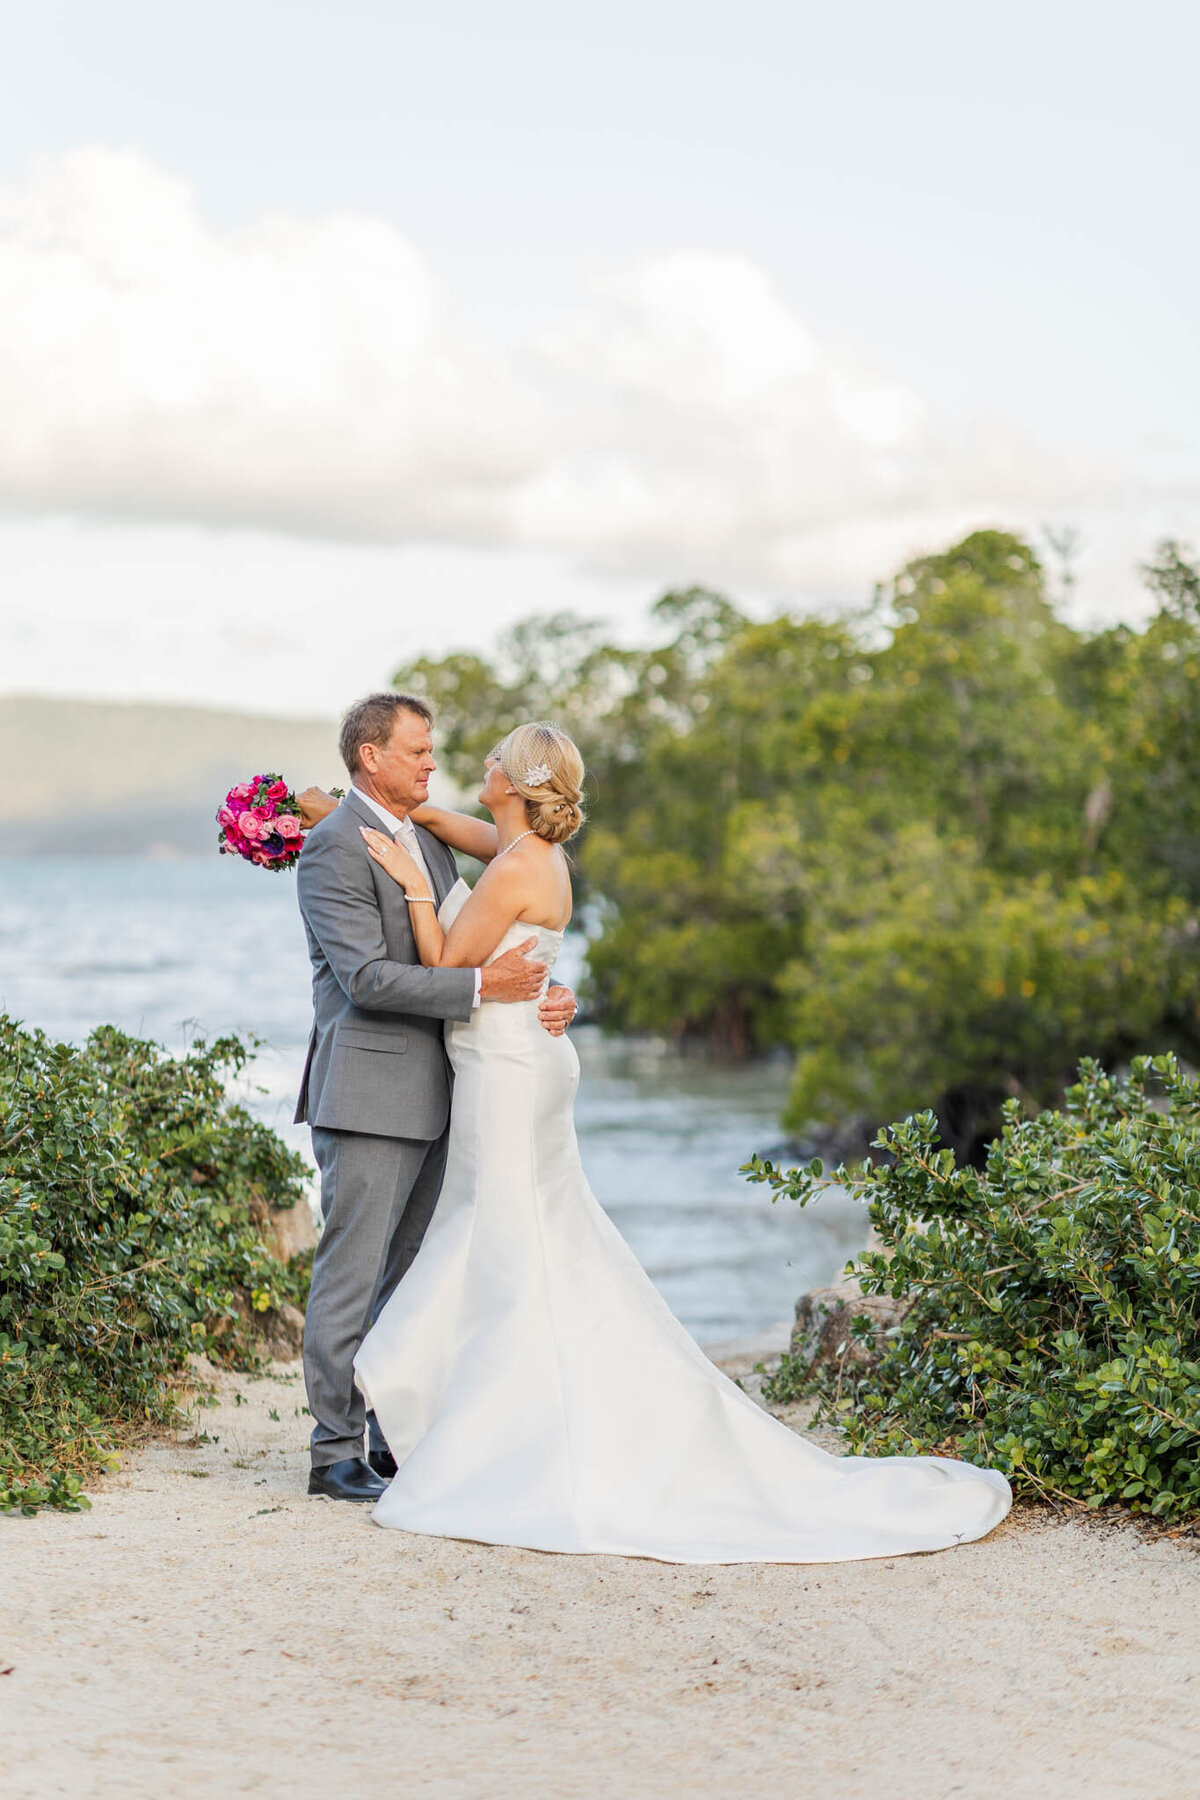 Bride and groom posed during Mr and Mrs photo tour on their wedding day in Airlie beach